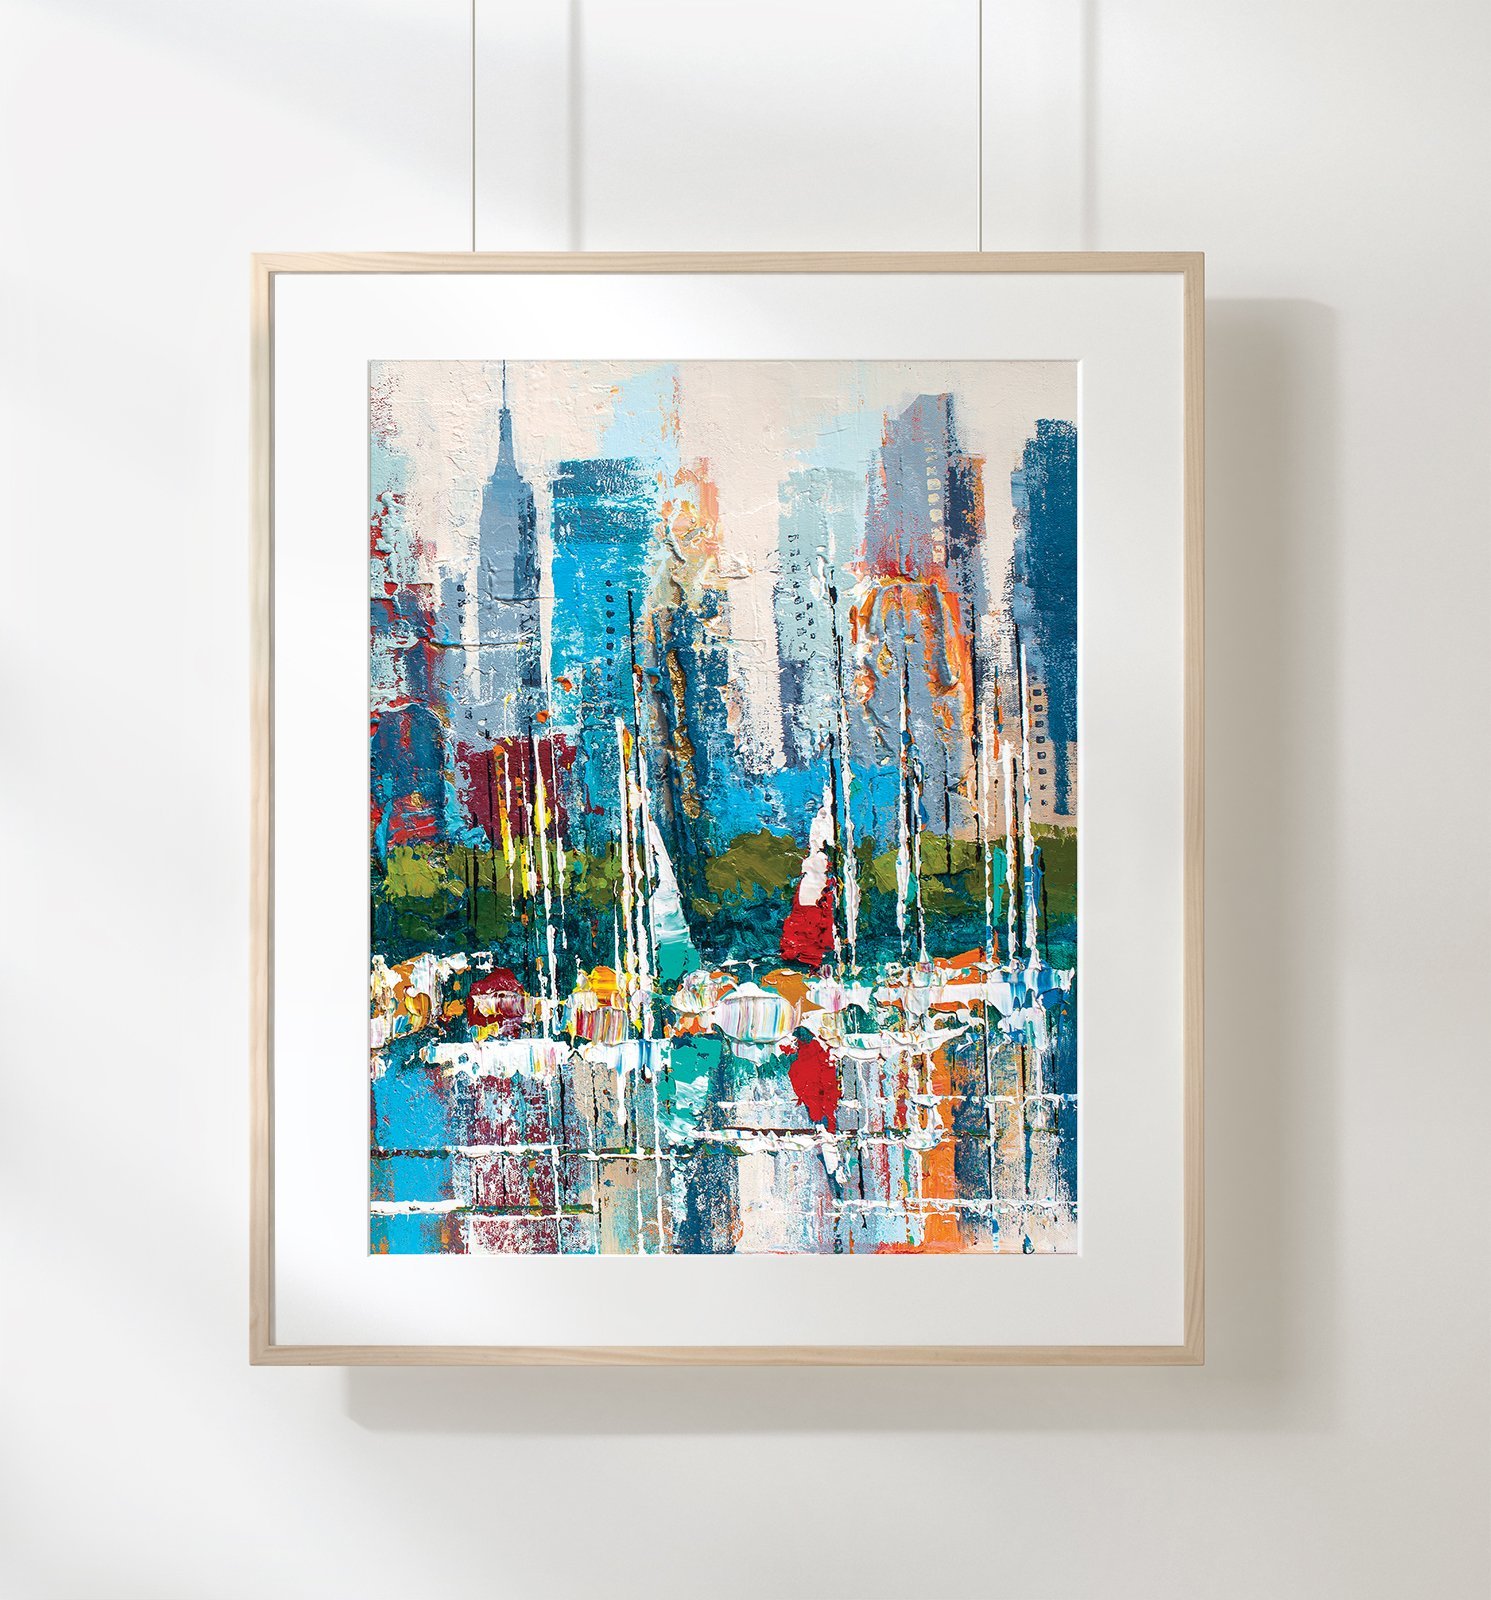 Original Acrylic Painting on canvas 16x20 Title Dreams of the Big City  Framed Print by L Roze - Pixels